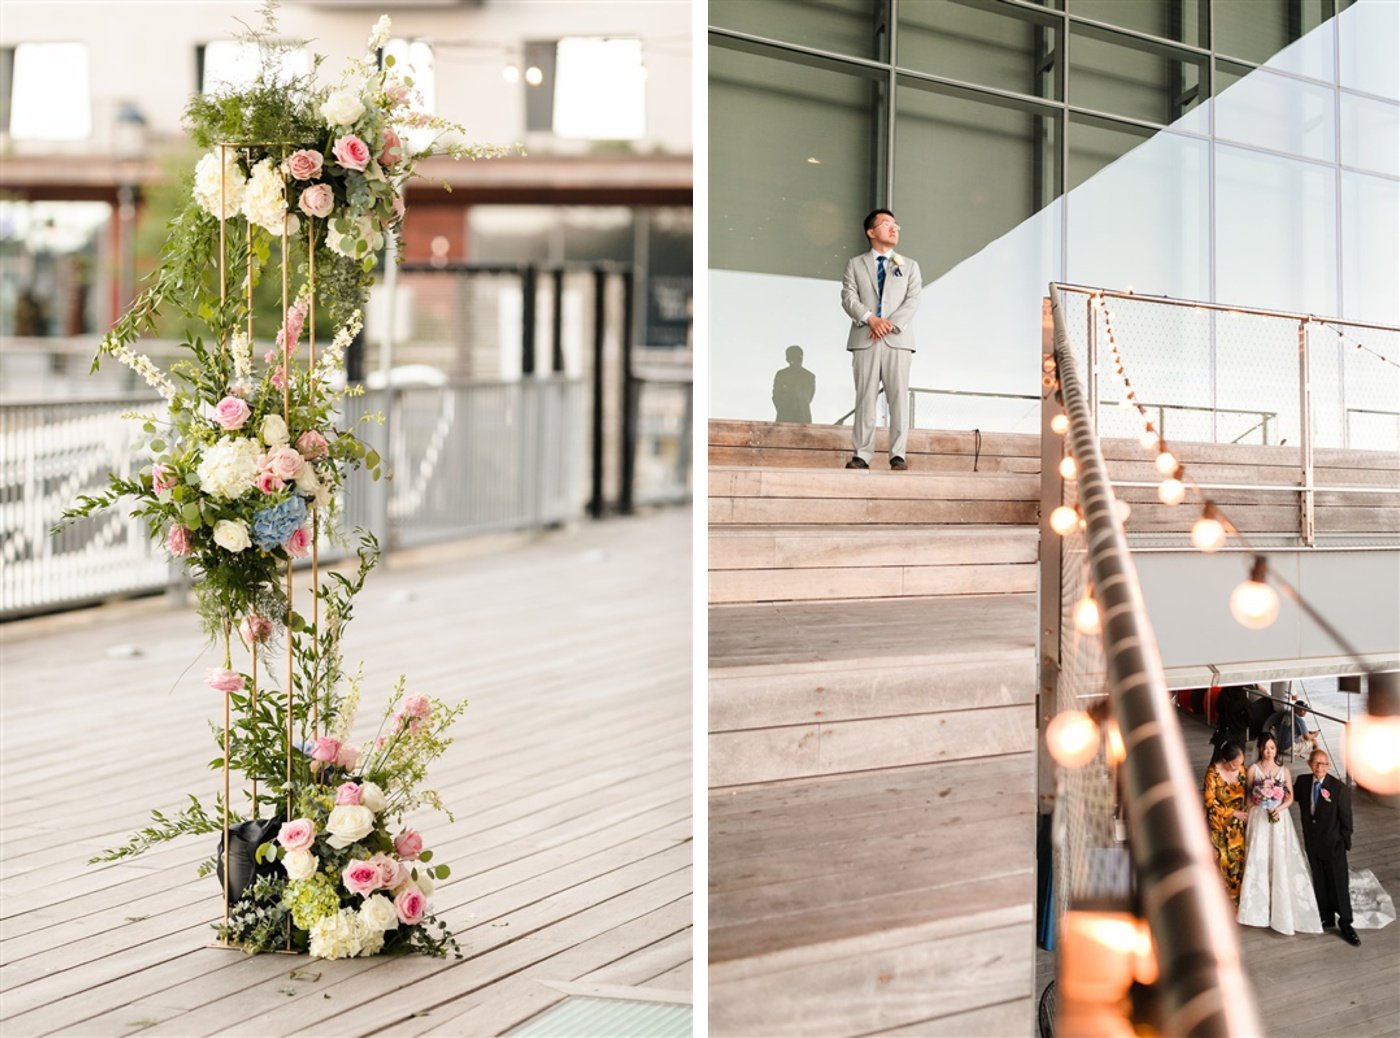 Gold pillars with pink and white roses and blue hydrangeas for a summer wedding ceremony